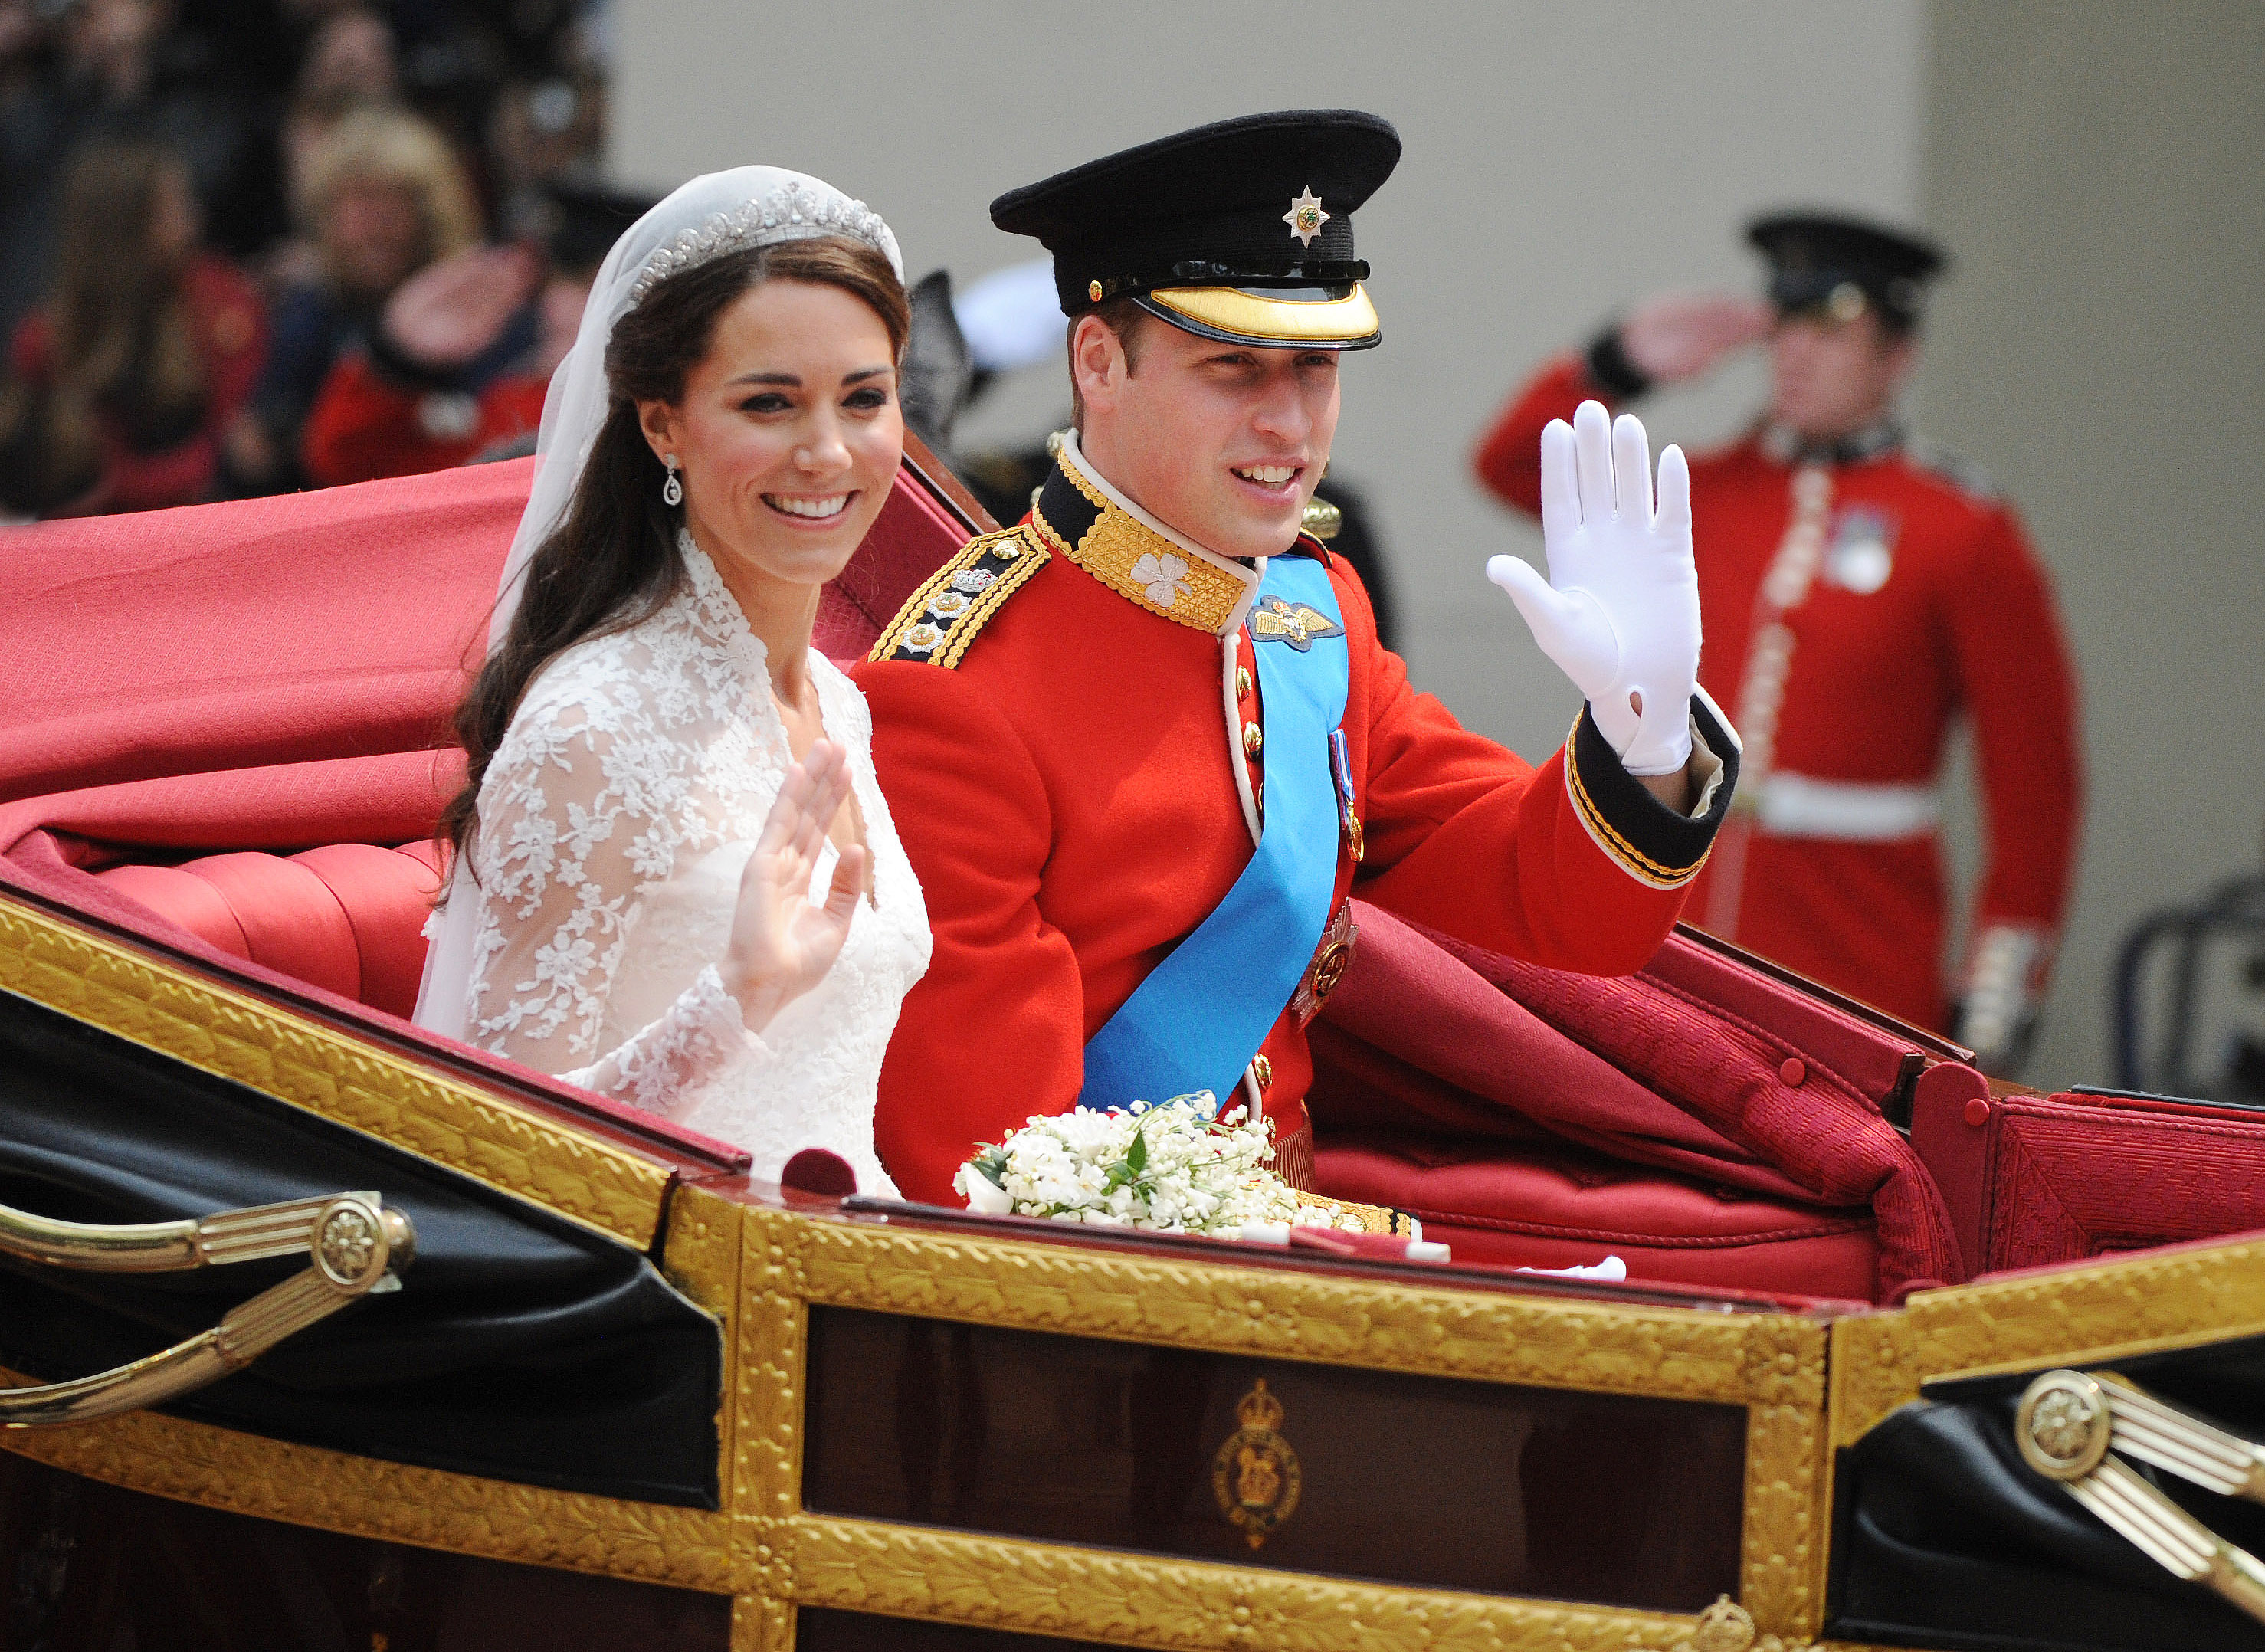 Prince William and Kate Middleton smiling during carriage ride after royal wedding